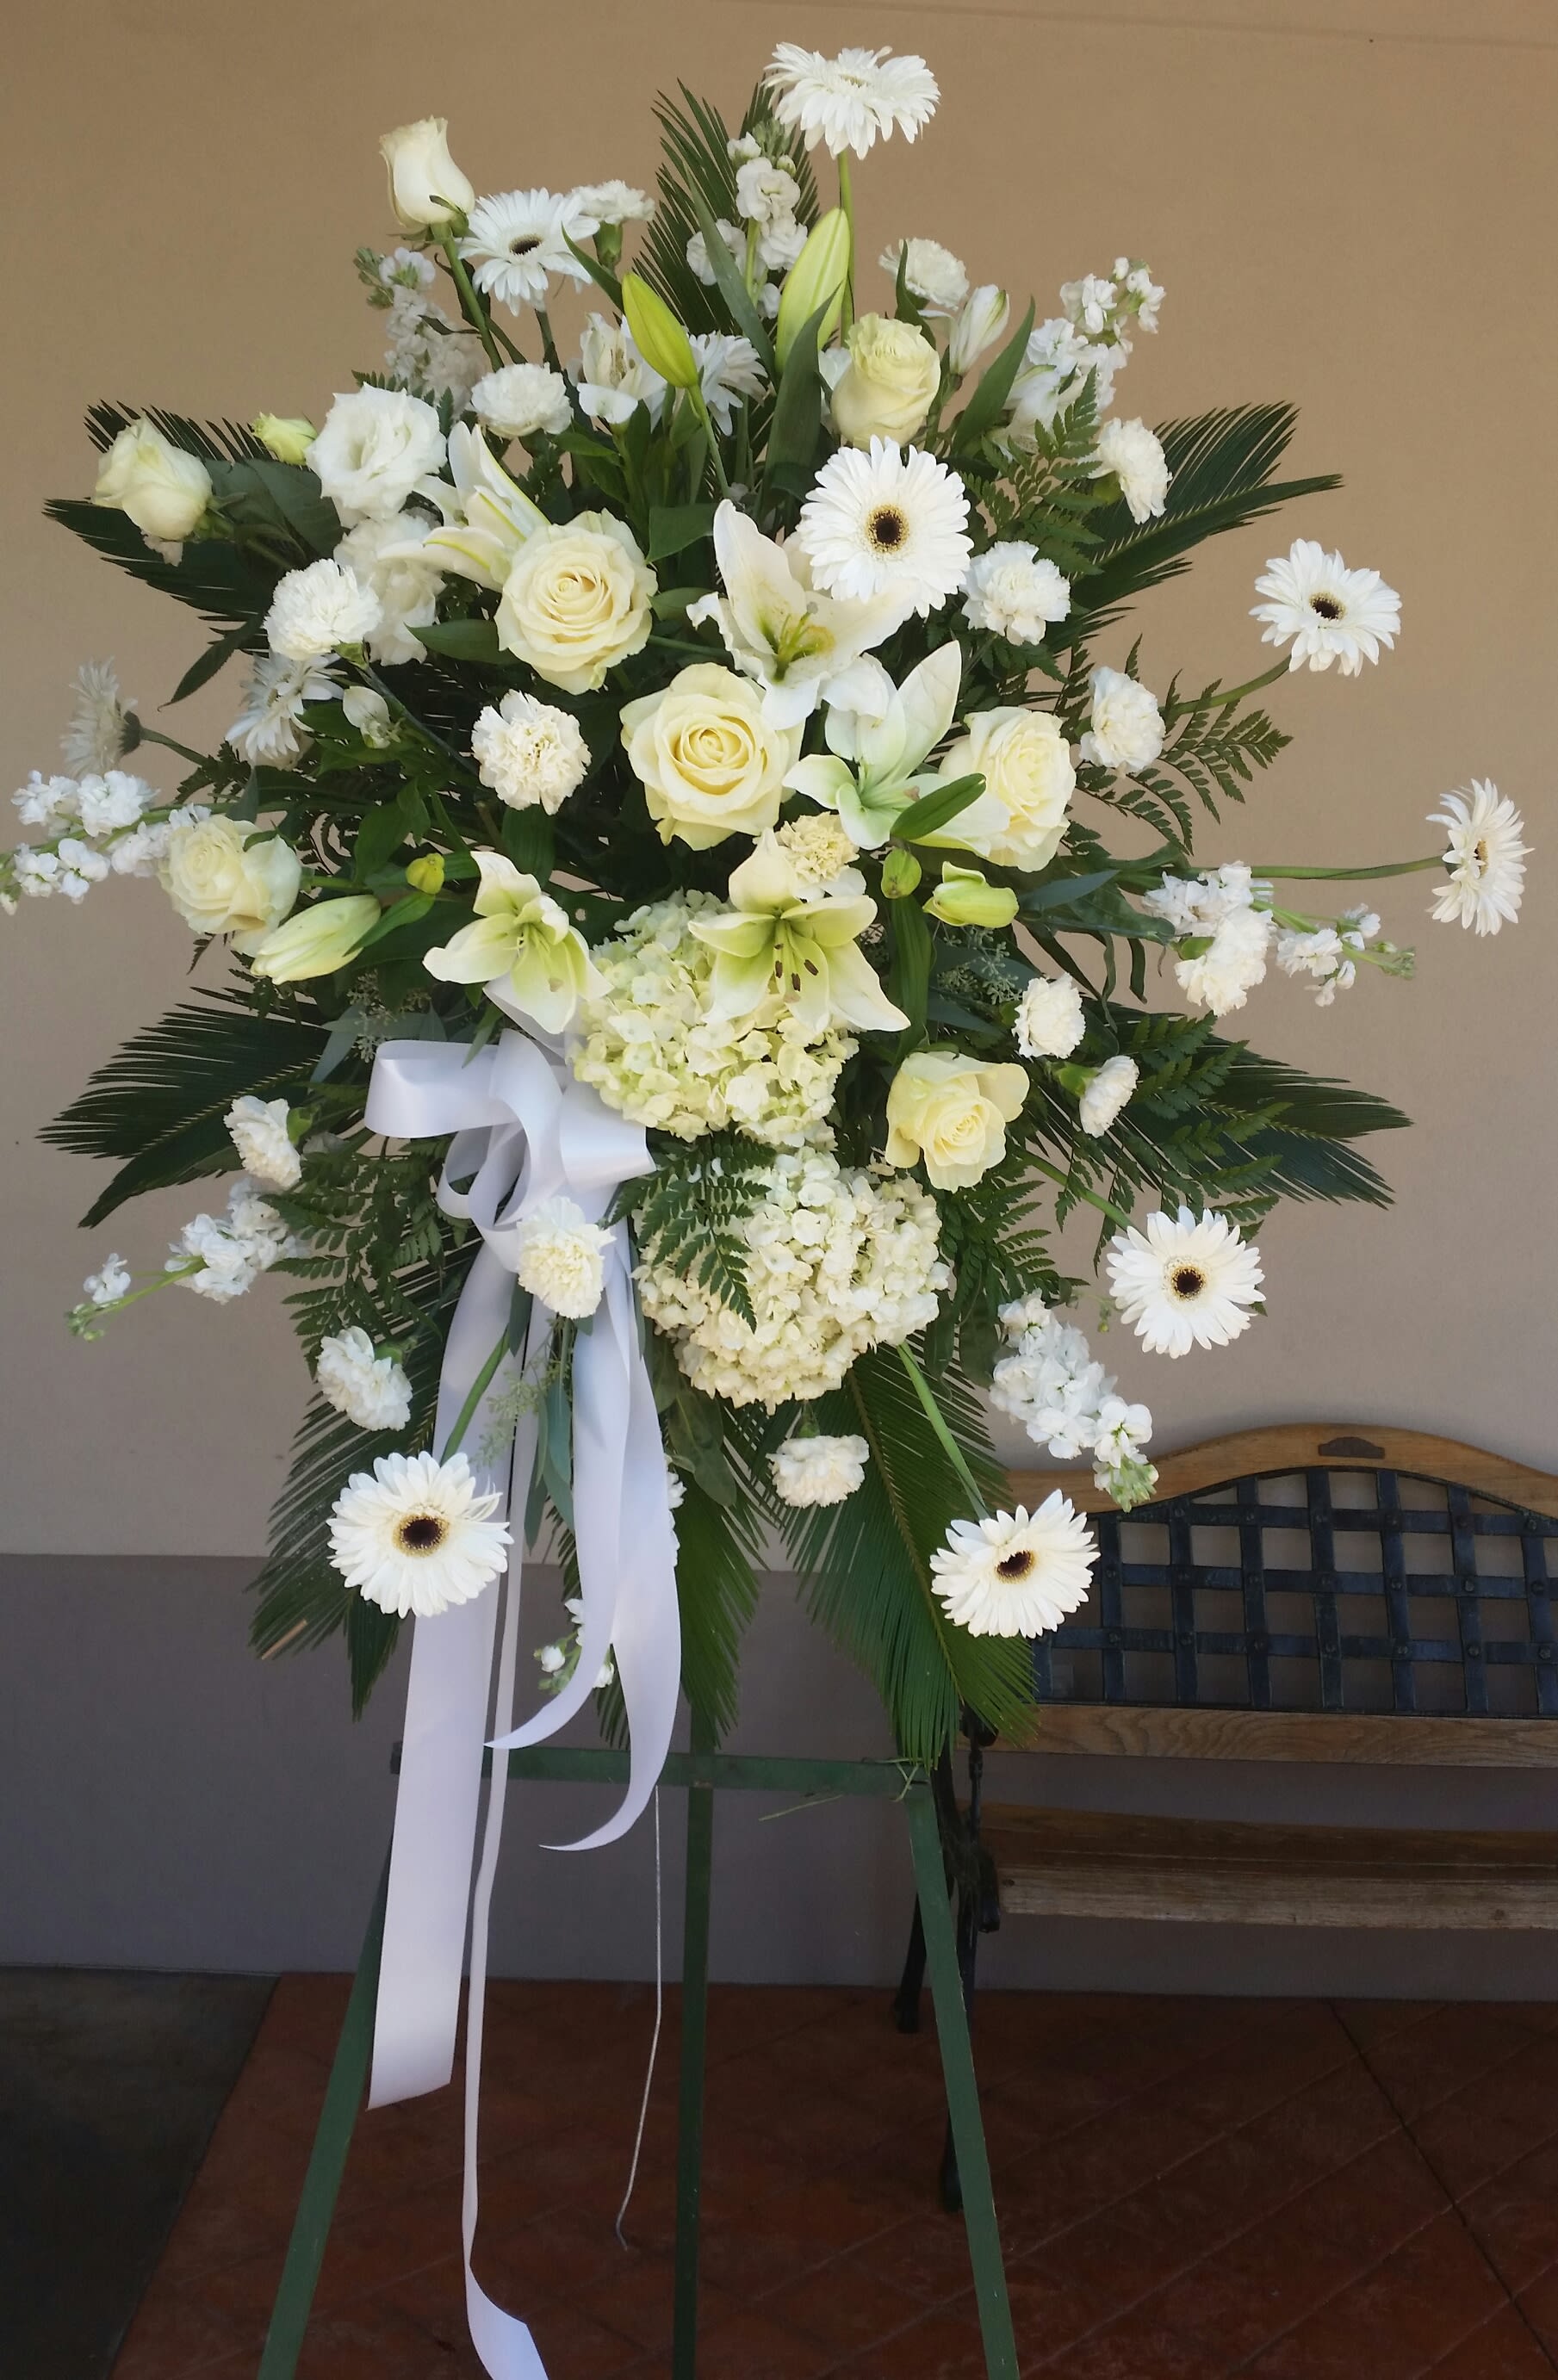 Rose, Hydrangea, Lilies and Carnations by Charlene - Large standing spray with white flowers for Funeral service, You can add banner $25.